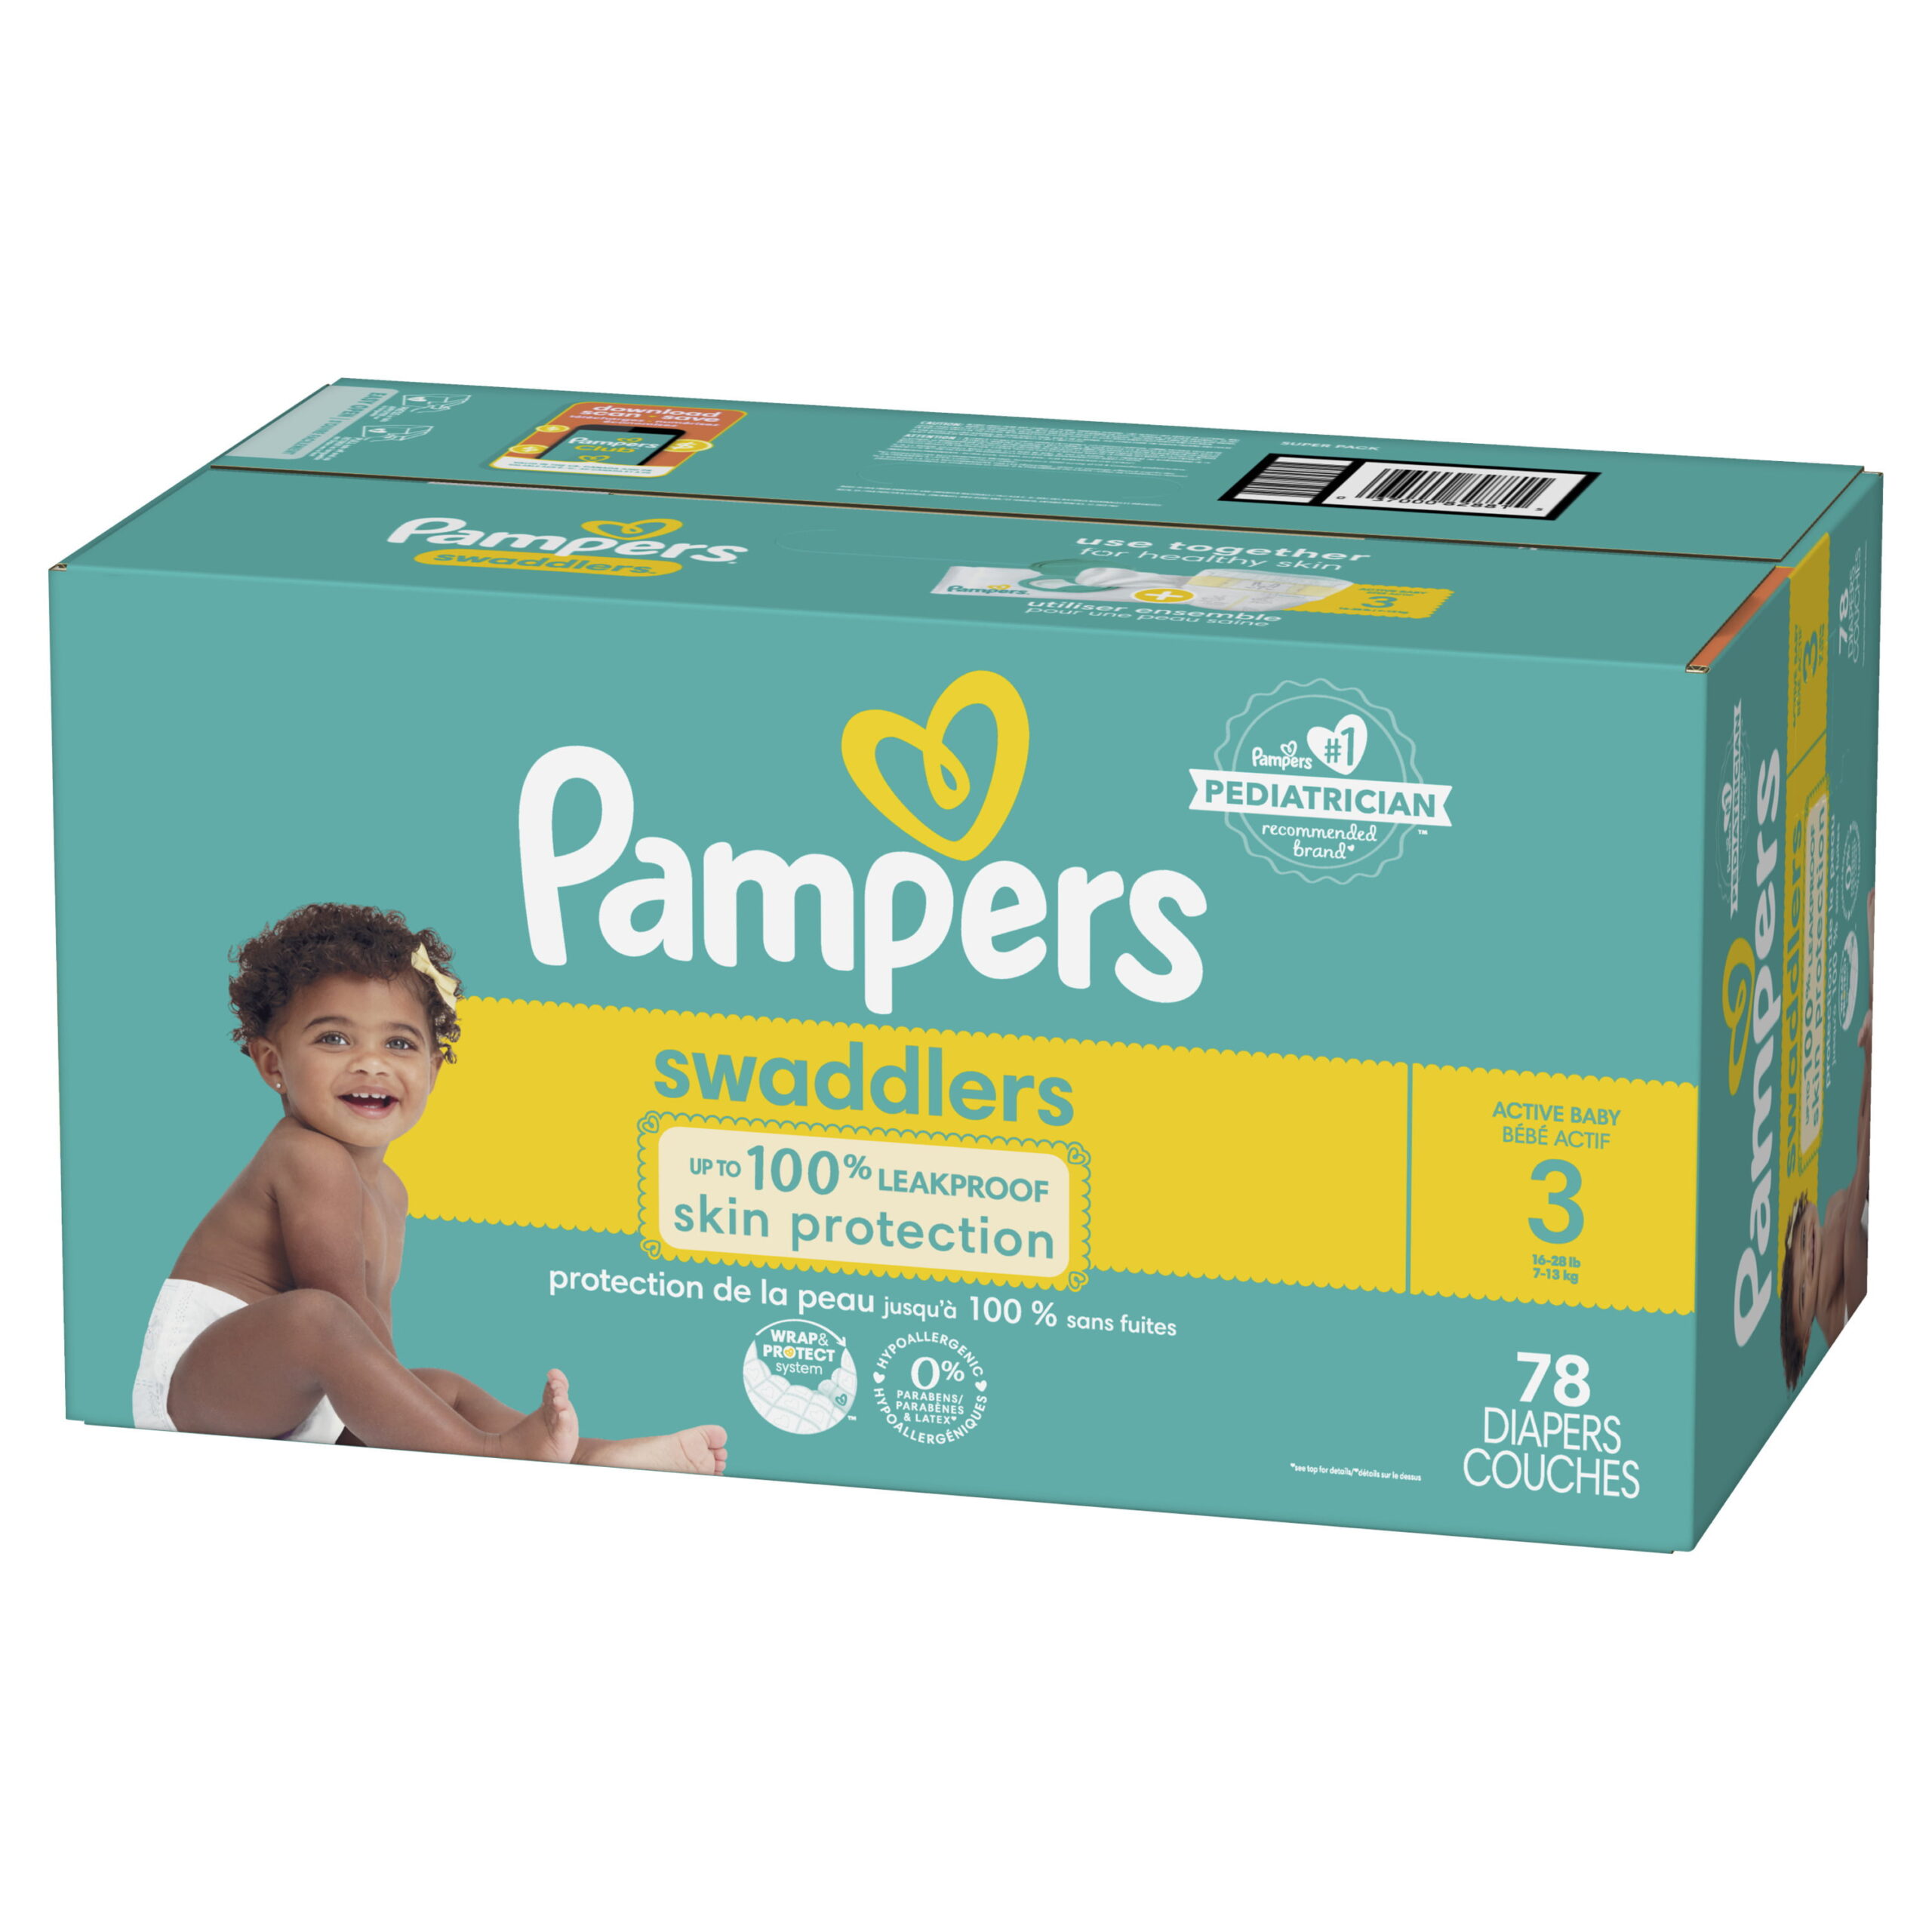 Pampers Swaddlers Diapers, Soft and Absorbent, Size 3, 78 Ct